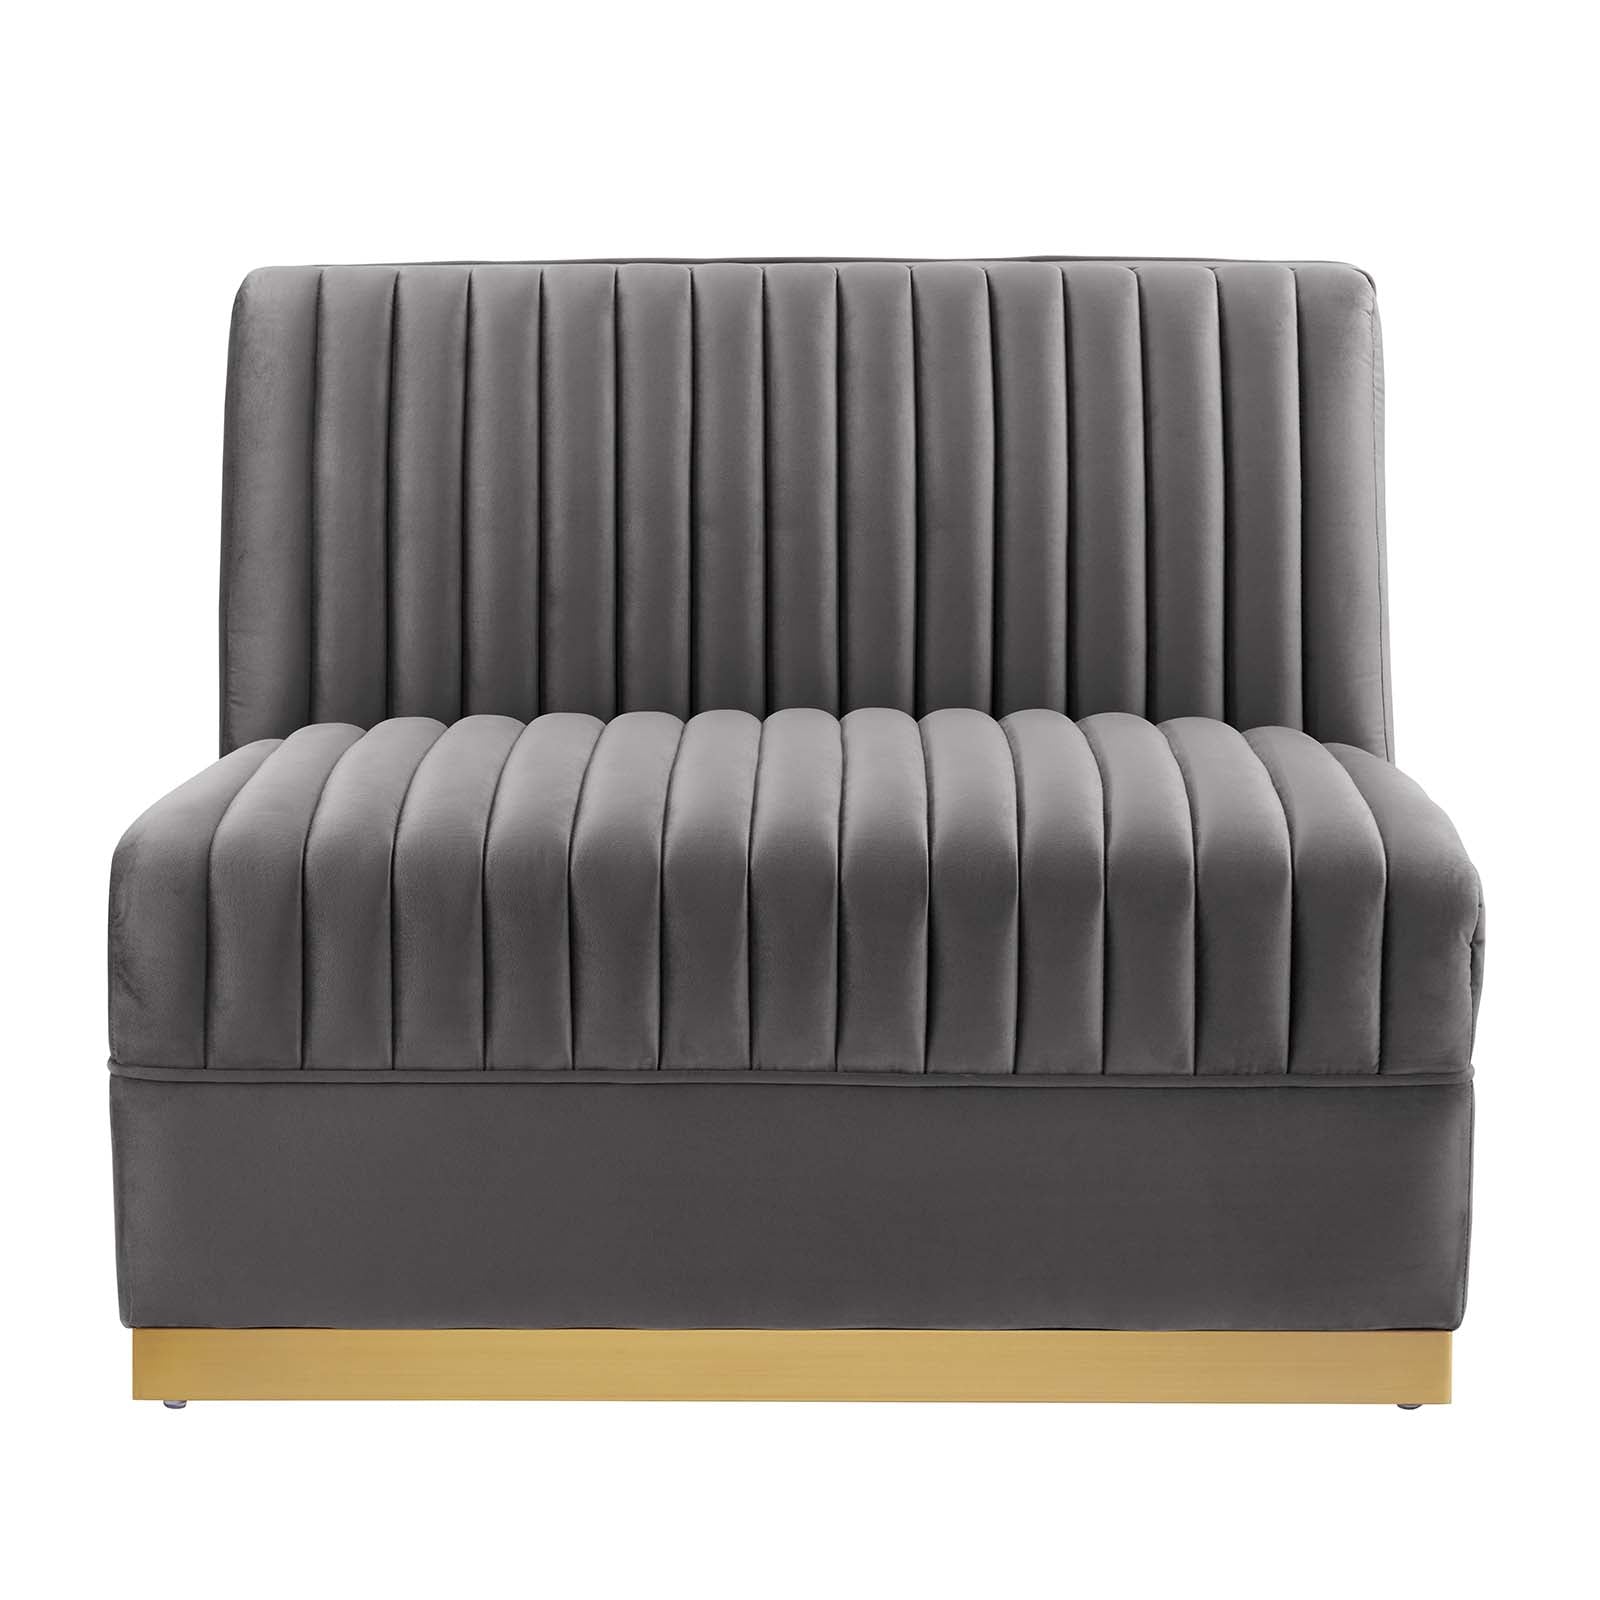 Modway Accent Chairs - Sanguine Channel Tufted Performance Velvet Modular Sectional Sofa Armless Chair Gray